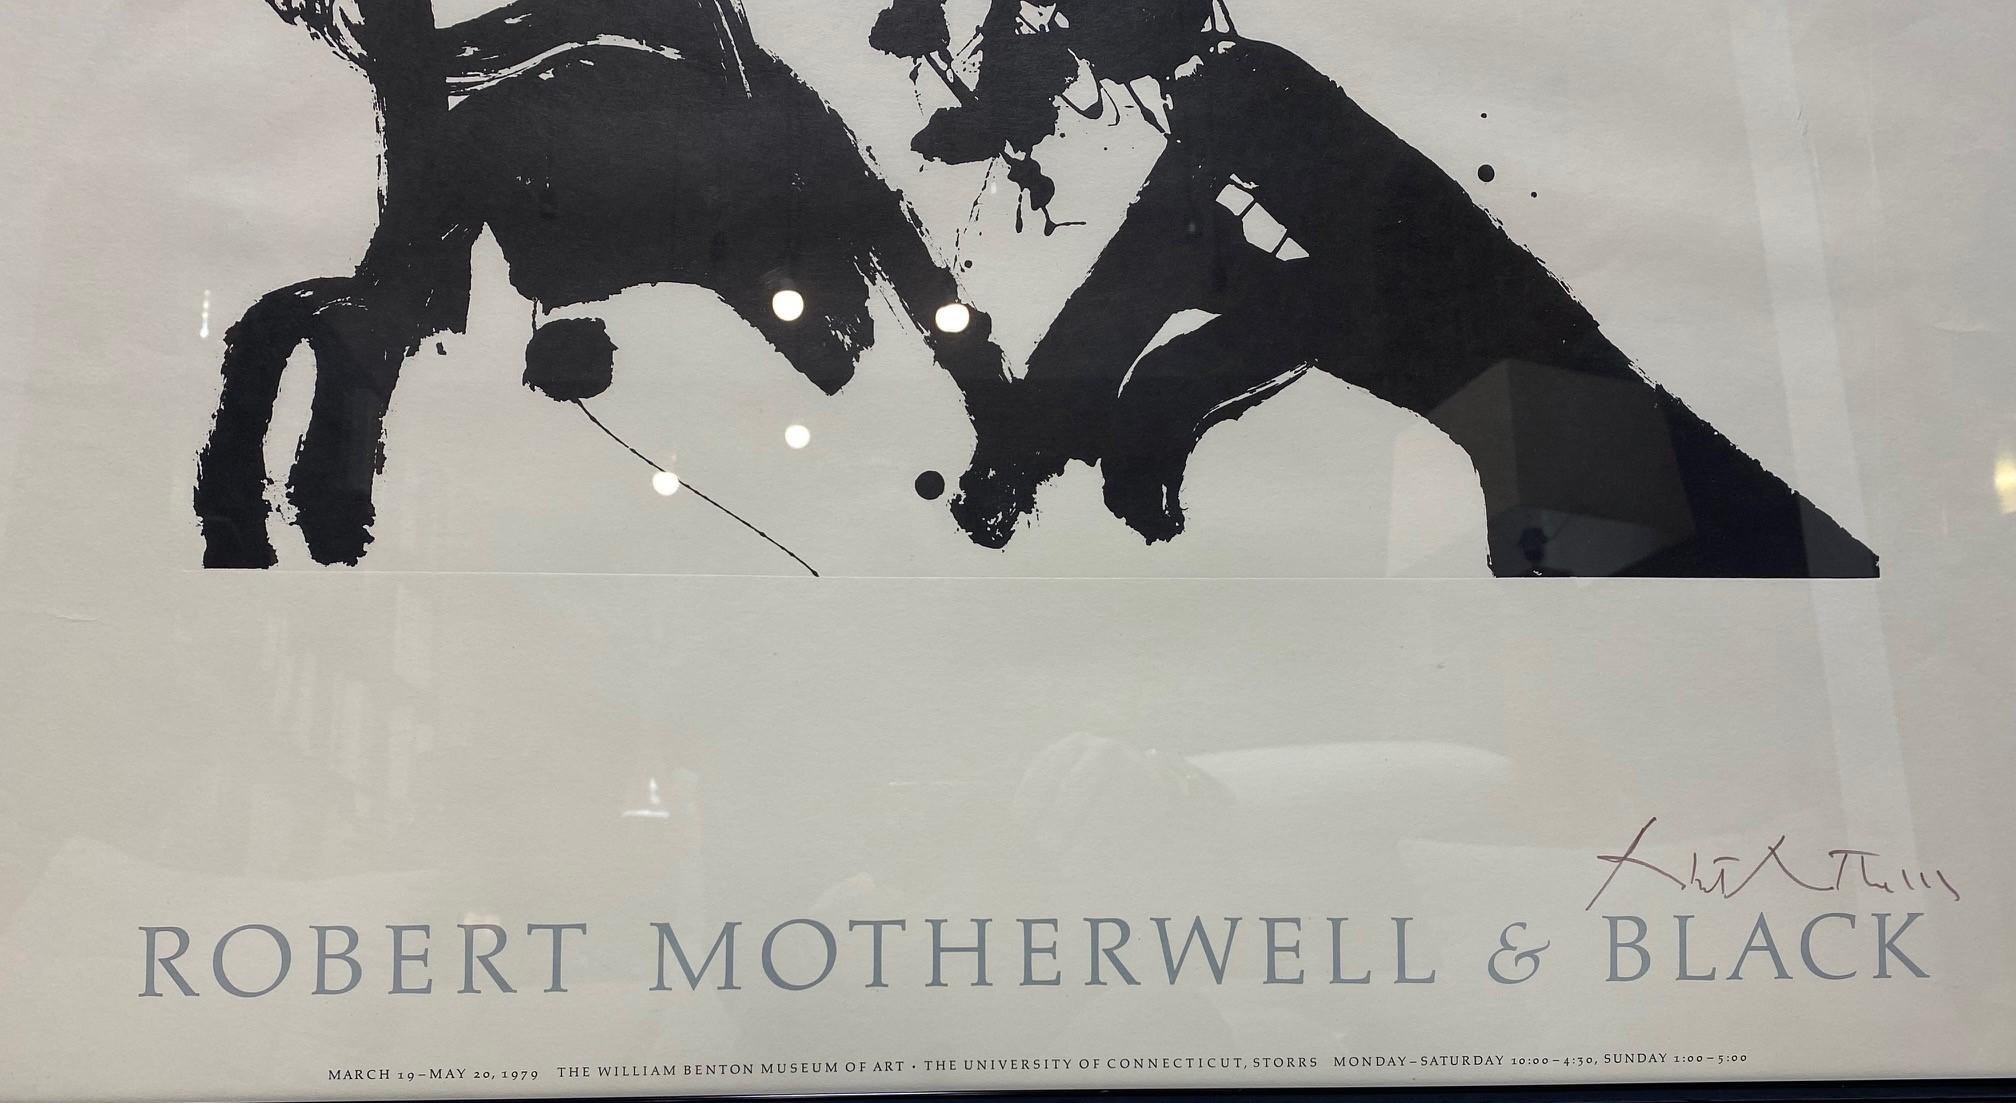 Robert Motherwell Hand Signed Exhibition & Black Lithograph Poster Dance I, 1979 For Sale 3